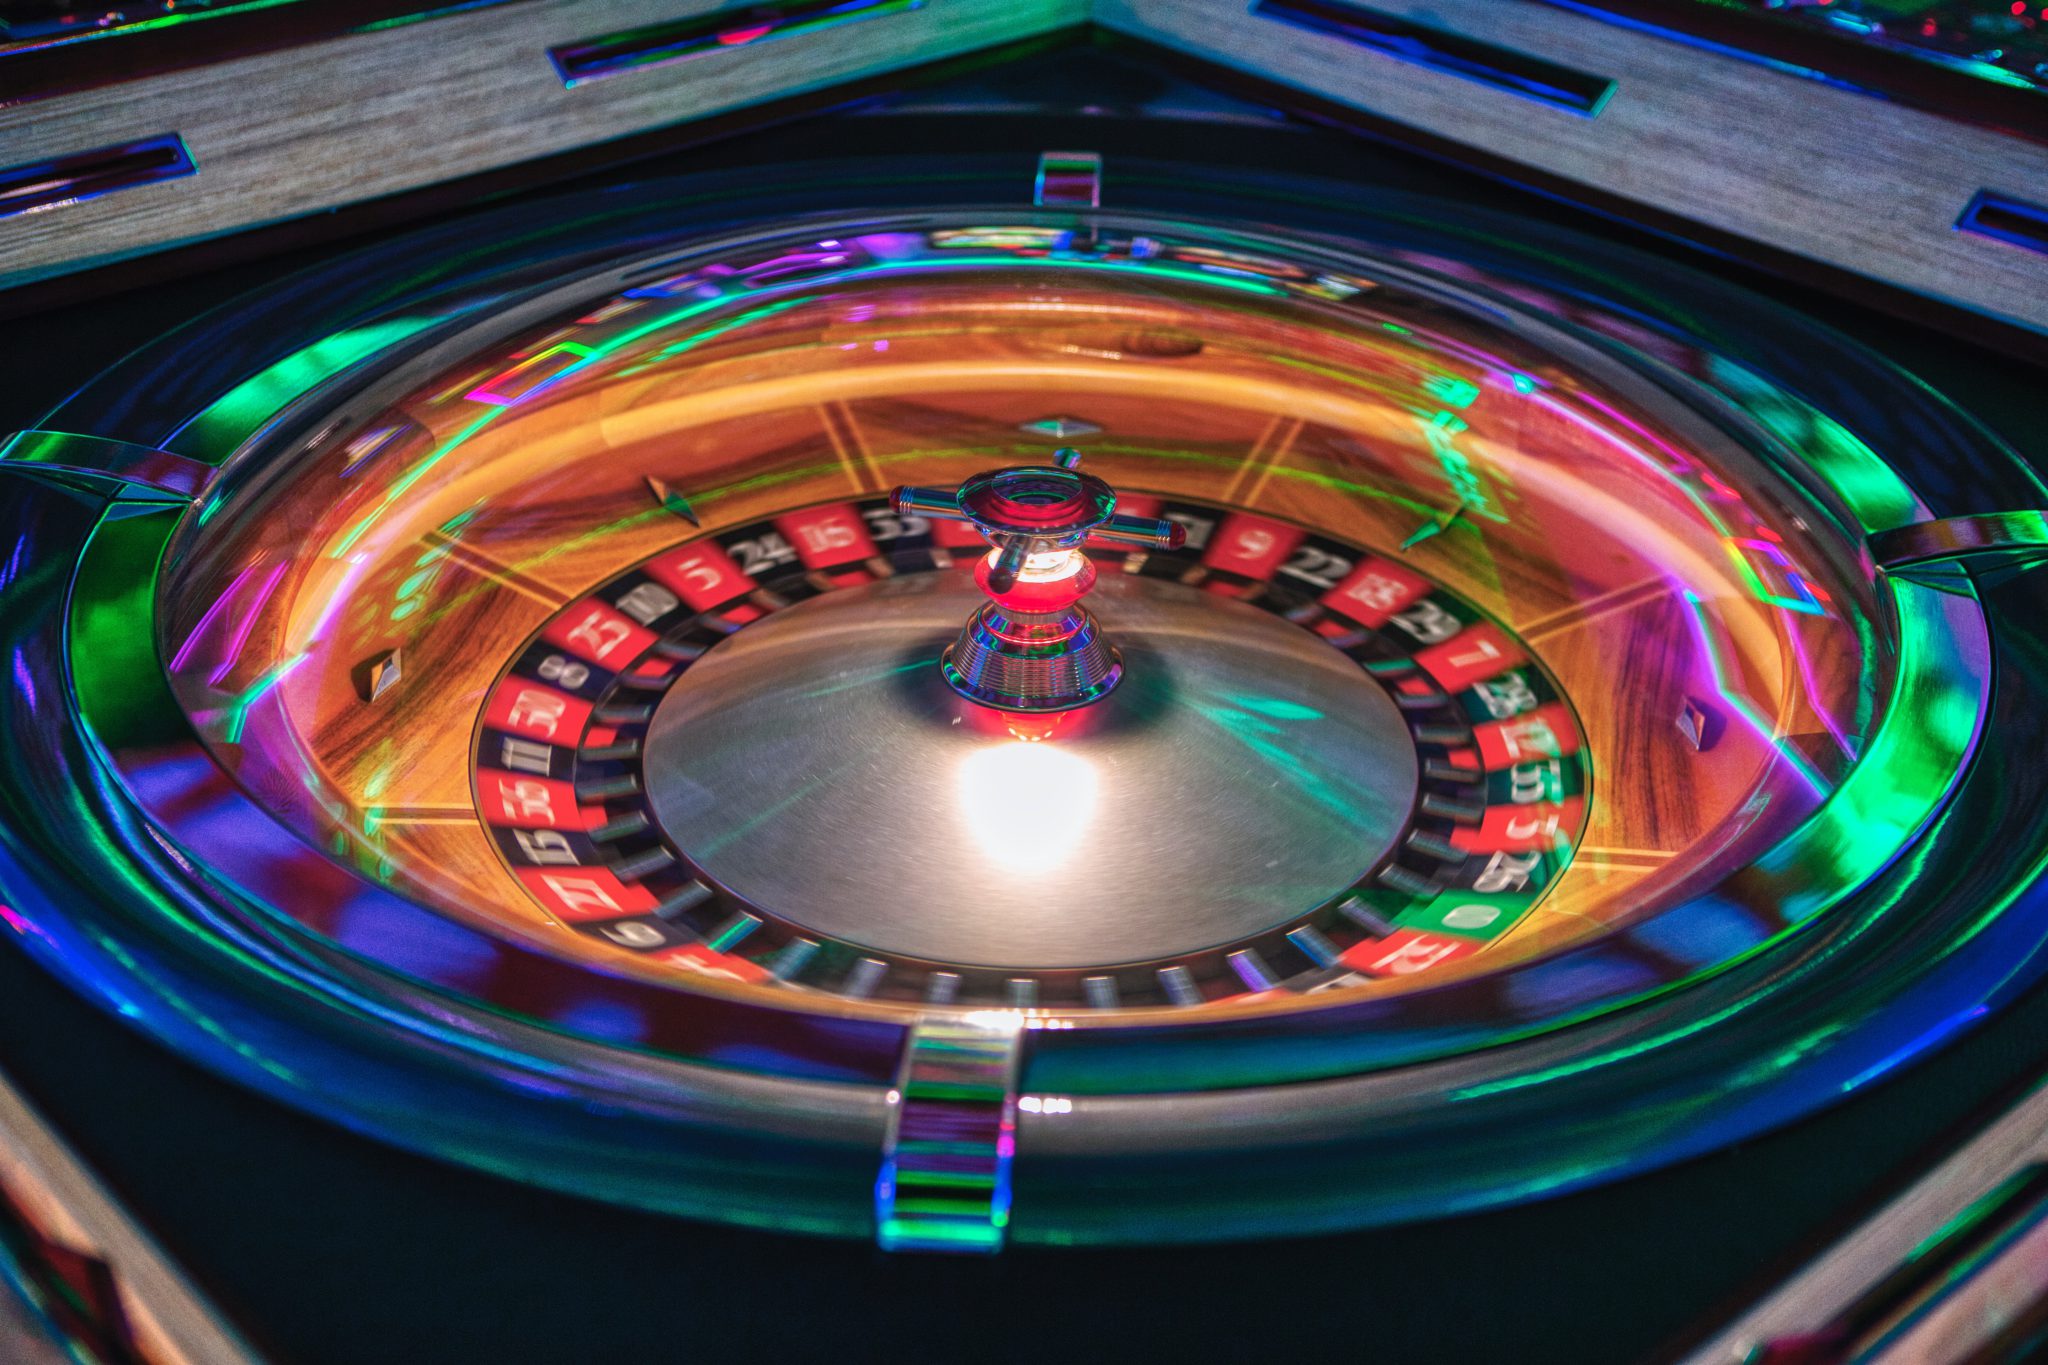 Representative image showing a spinning roulette wheel lit up by neon lights